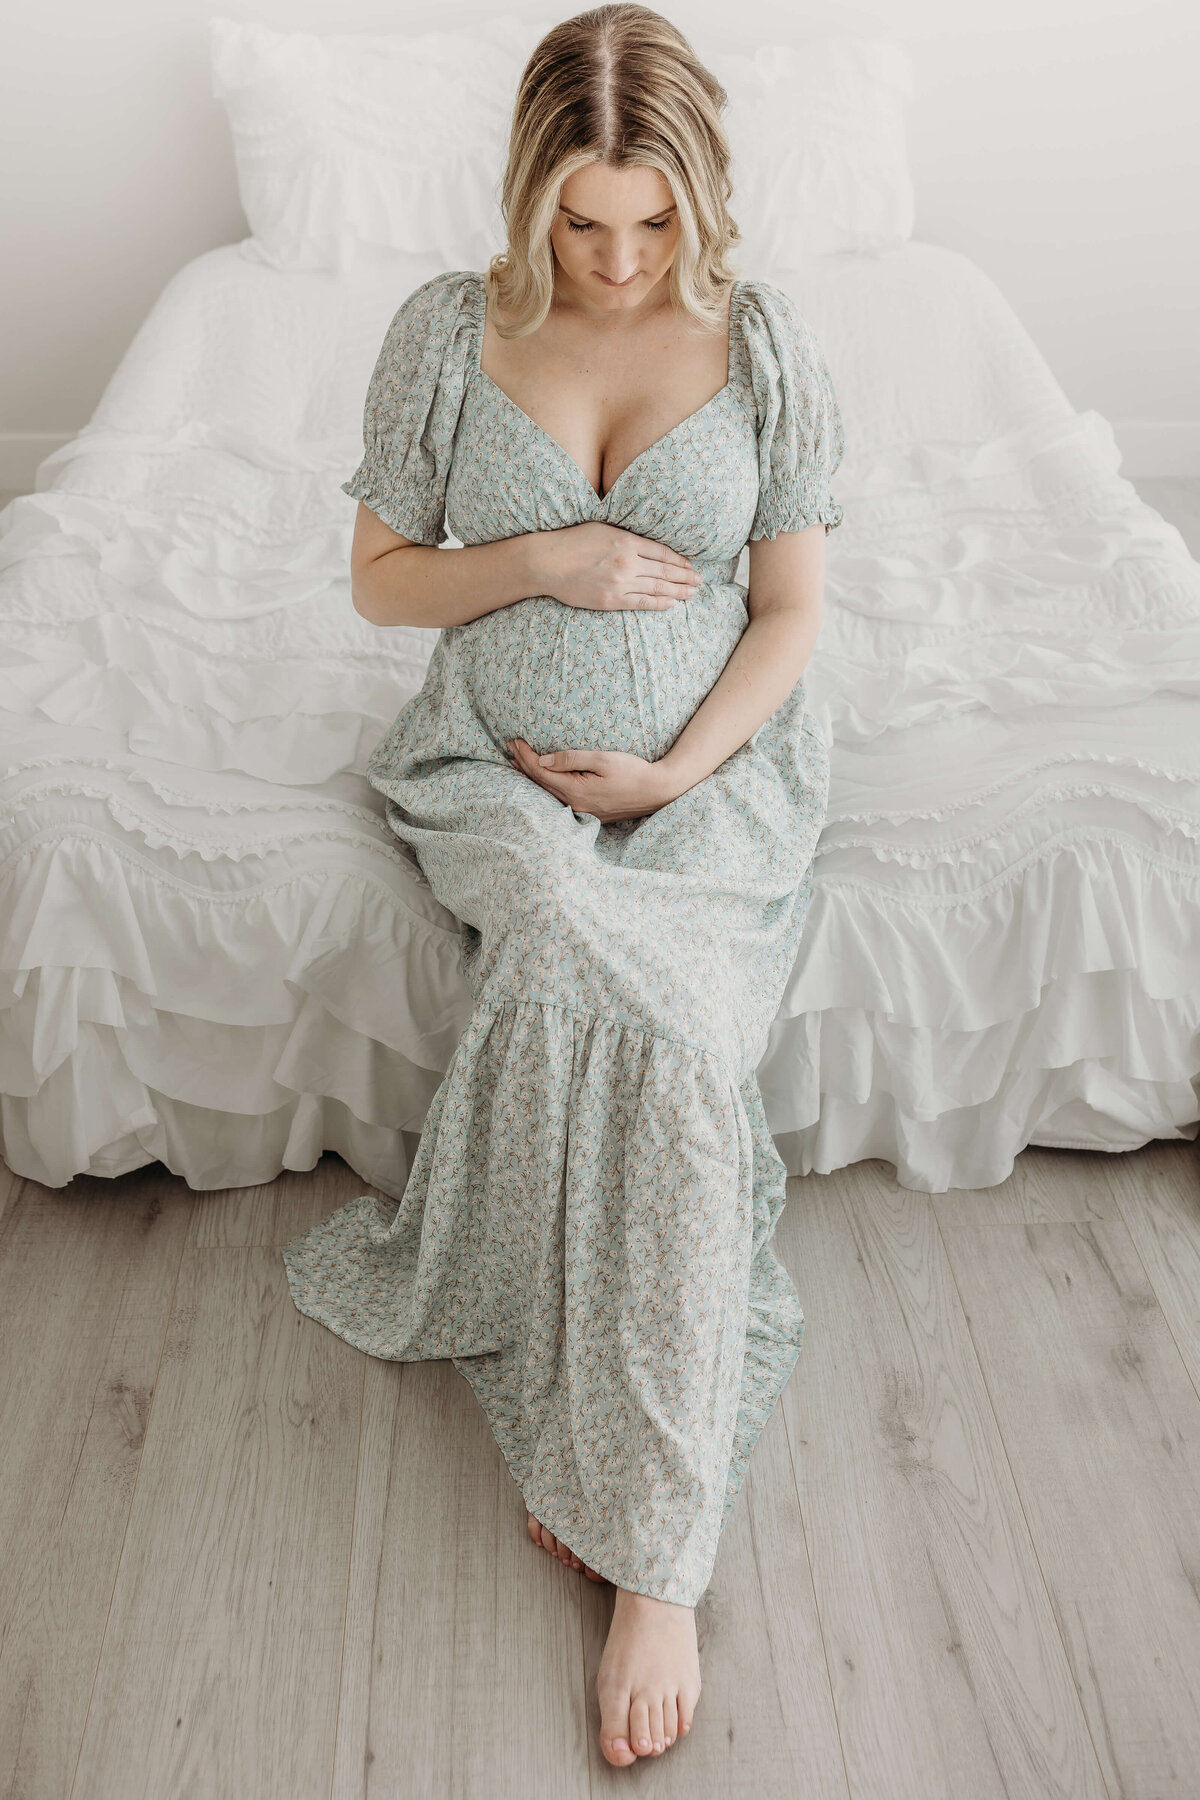 Pregnant mom in blue and green dress sitting on bed